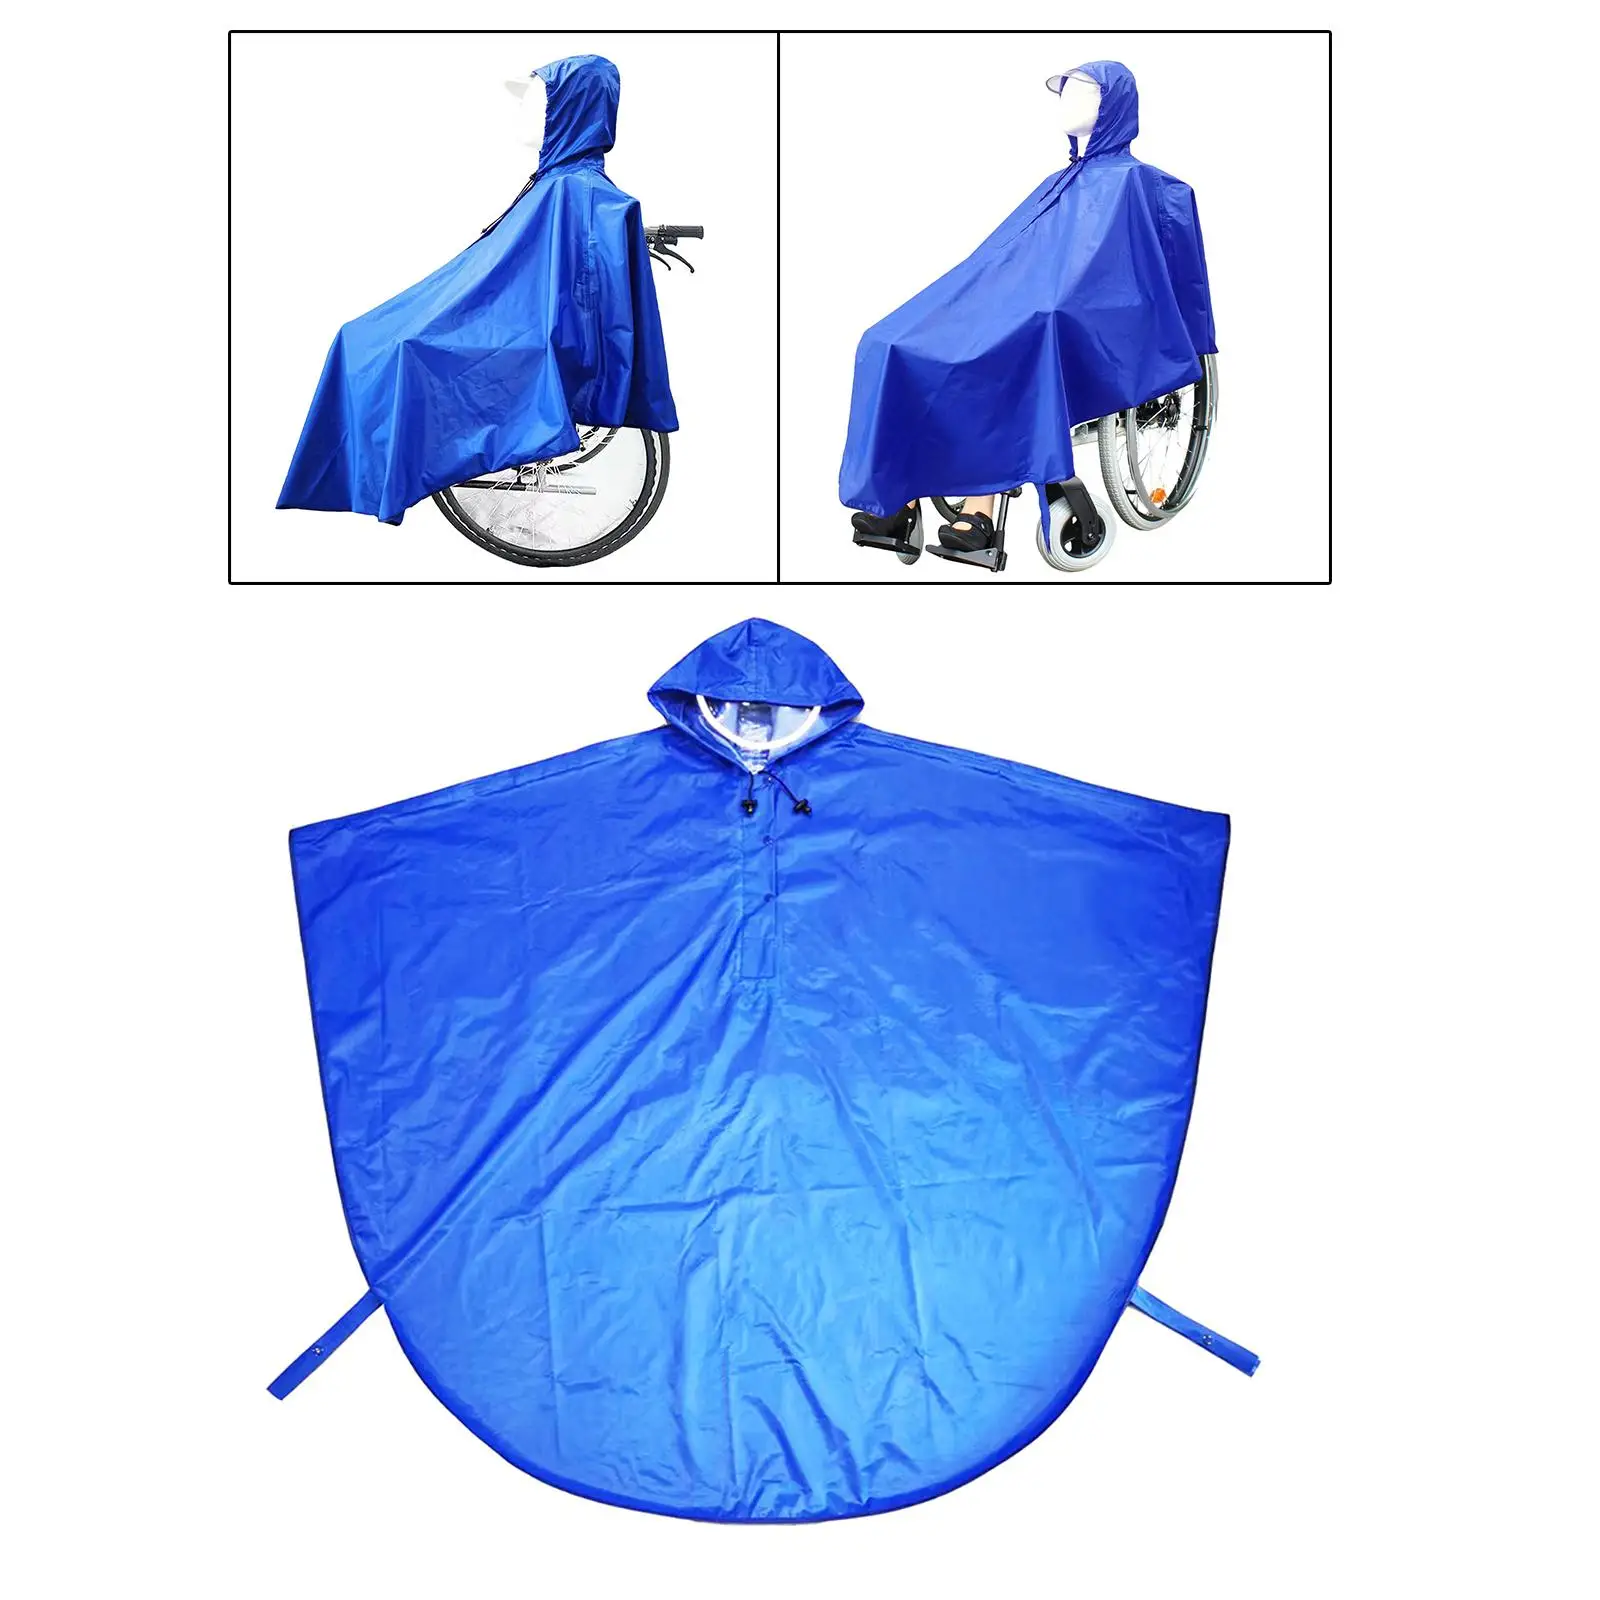 Wheelchair Poncho Reflective Strip Portable Adjustable Rain Protection Cape for Camping Activity Rainy Day Travel Birthday Gift